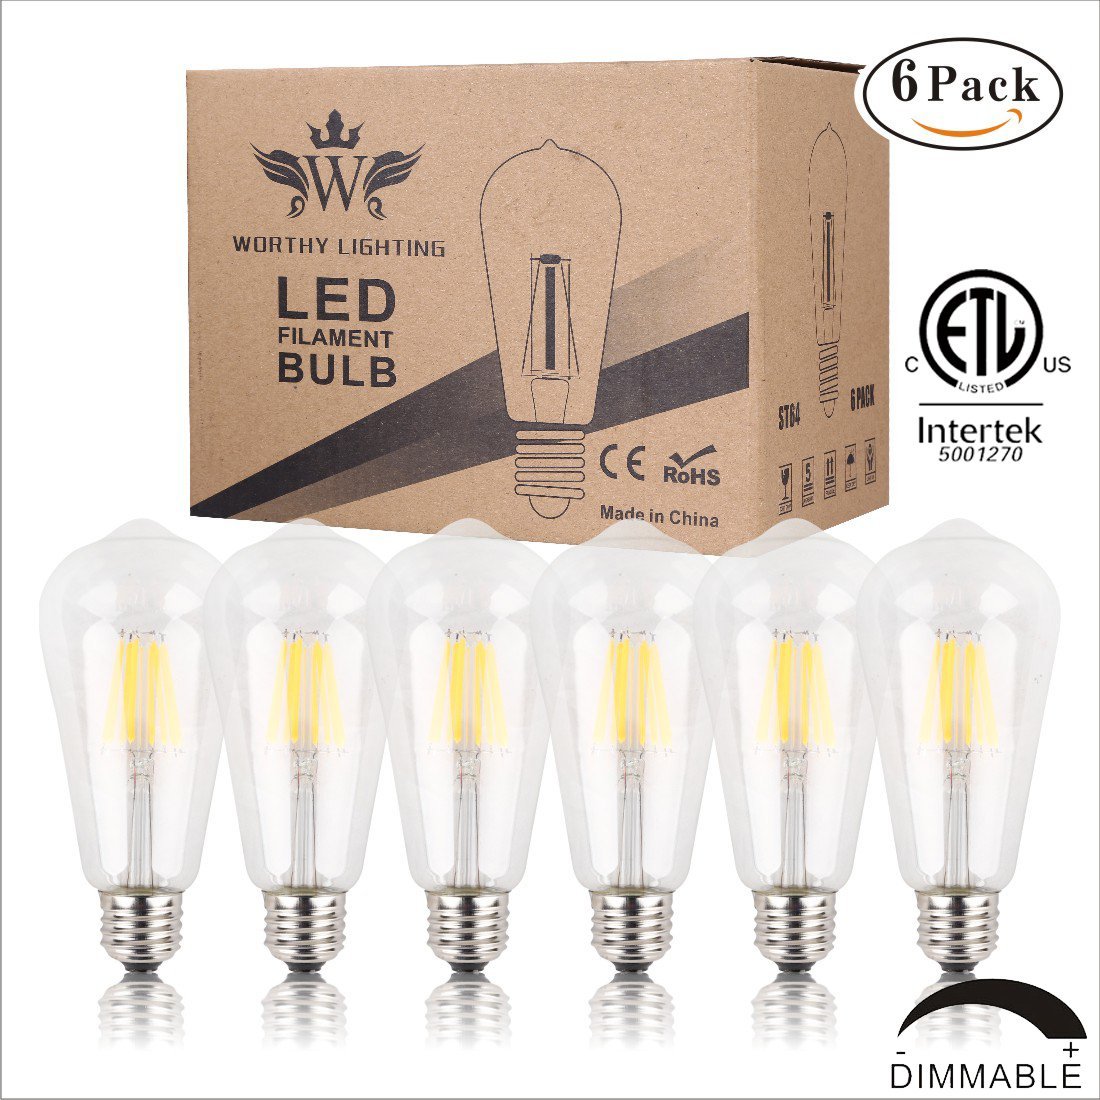 Dimmable Vintage Edison Style Light Bulb